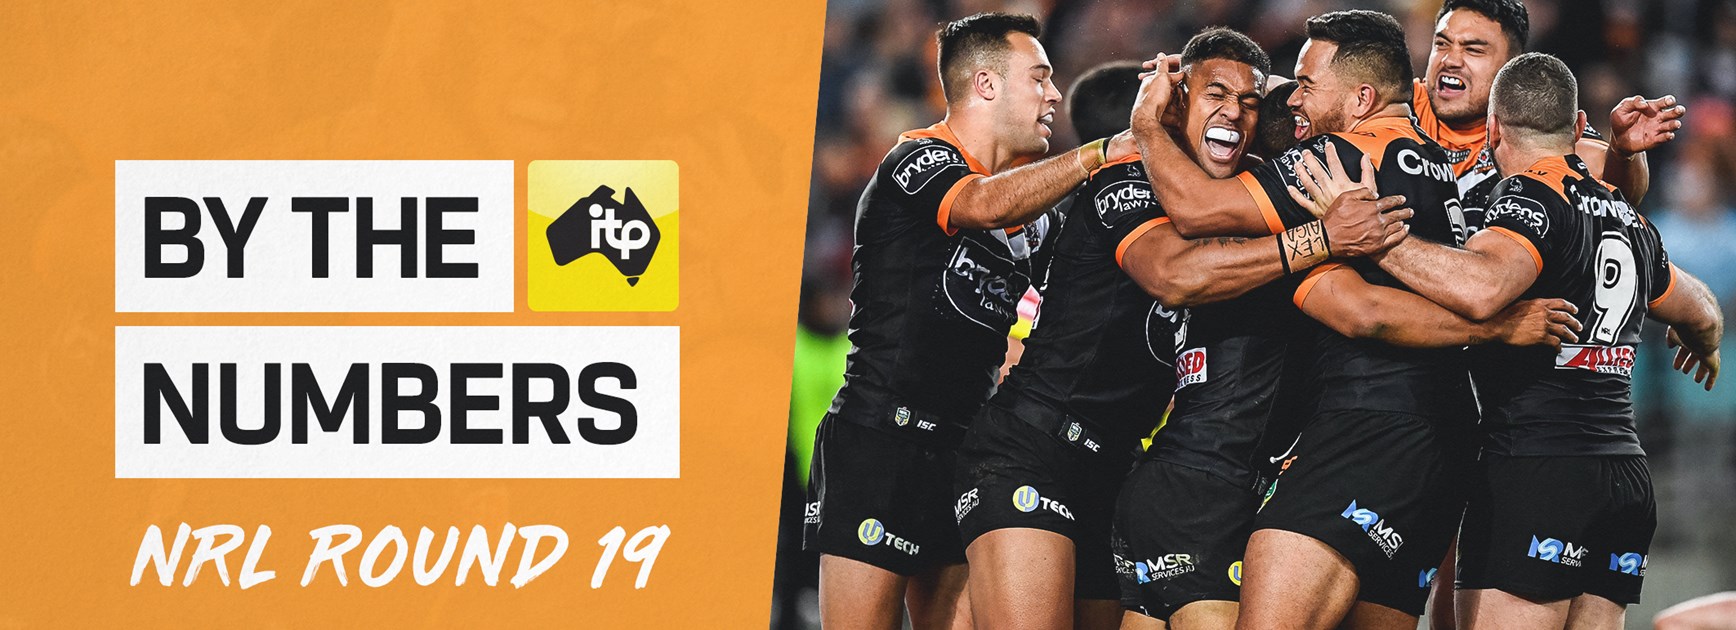 By the Numbers: Round 19